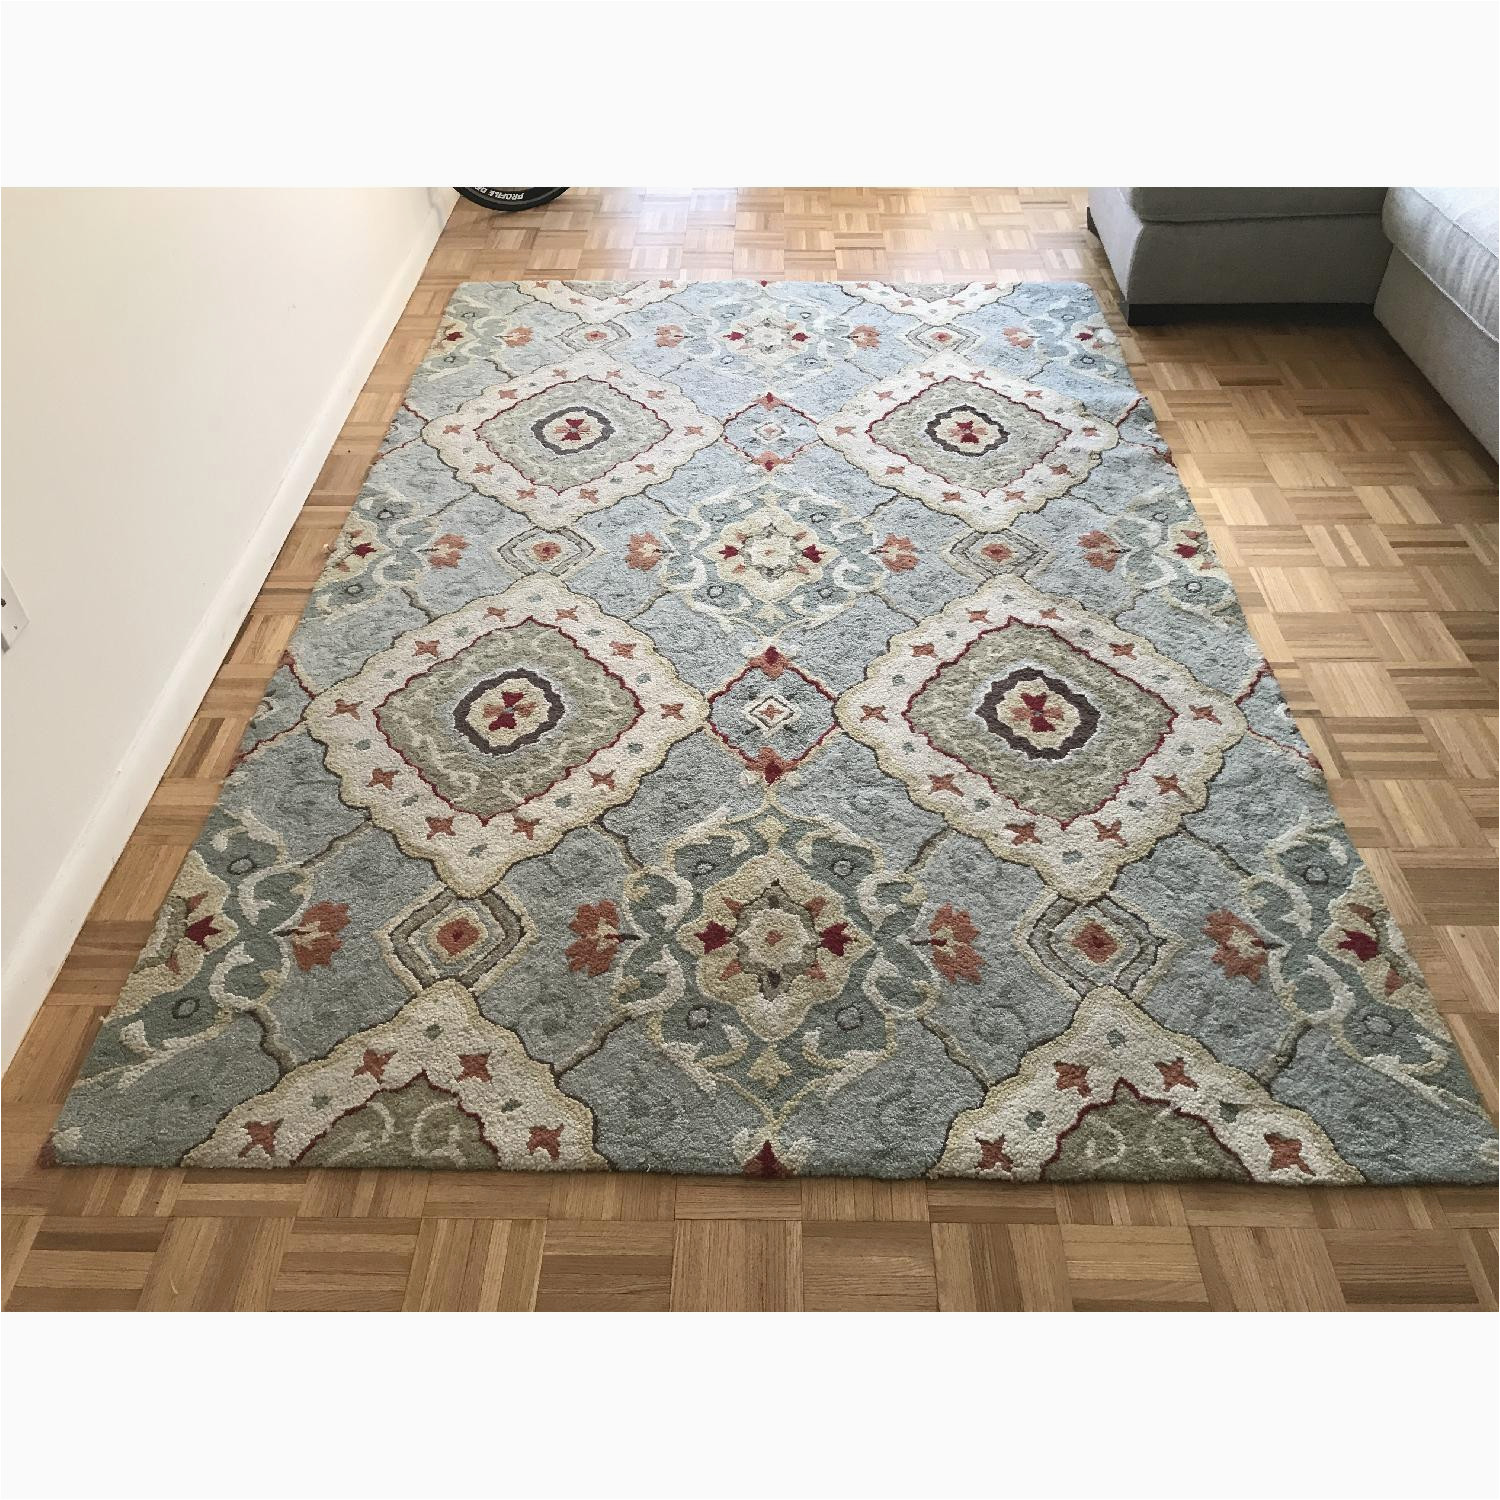 8×10 area Rugs Pier One Pier 1 Imports Tapis area Rug